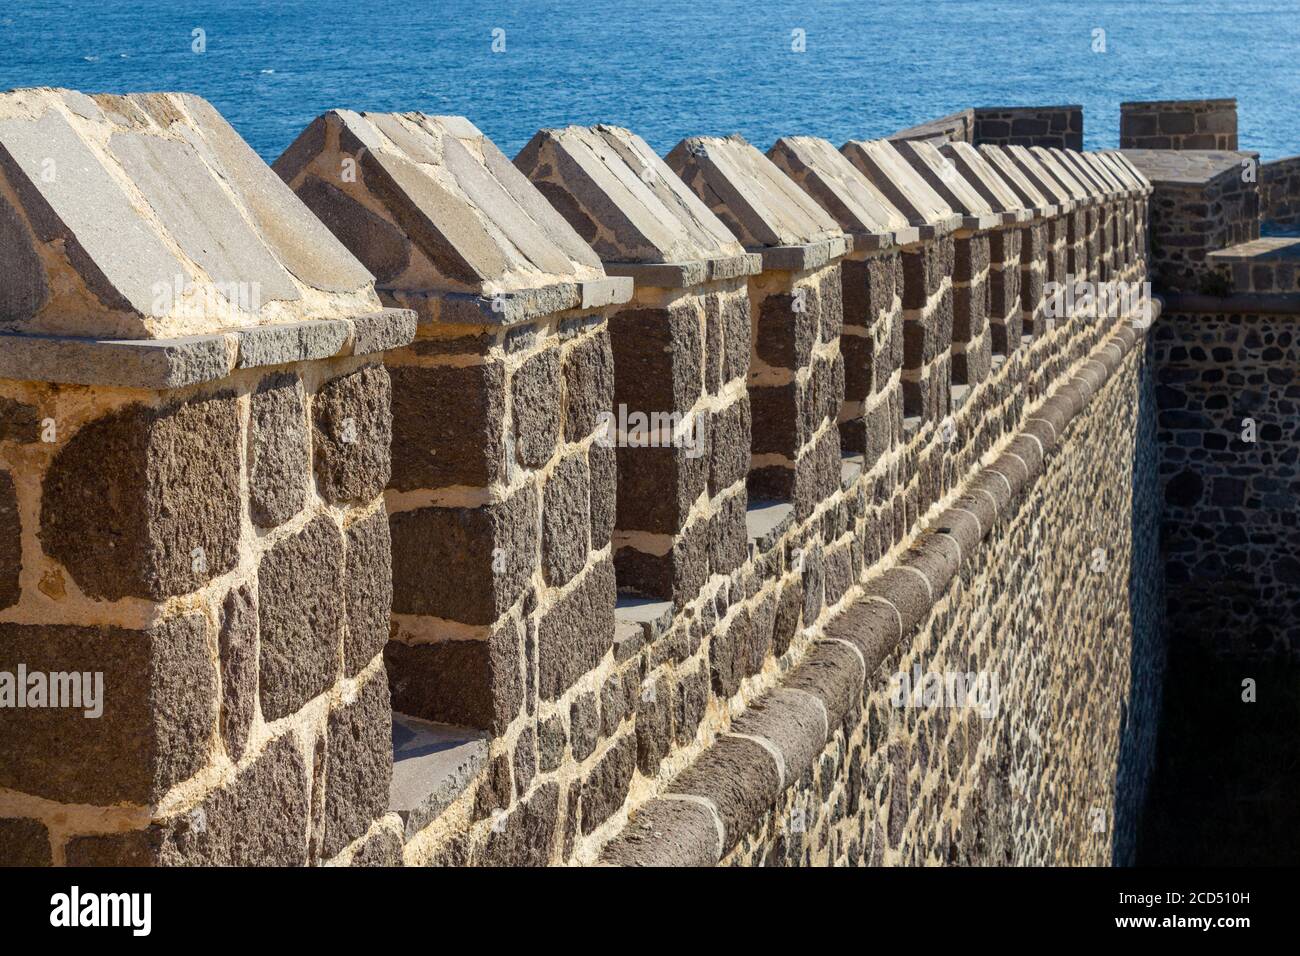 Castle defense wall and sea background Stock Photo